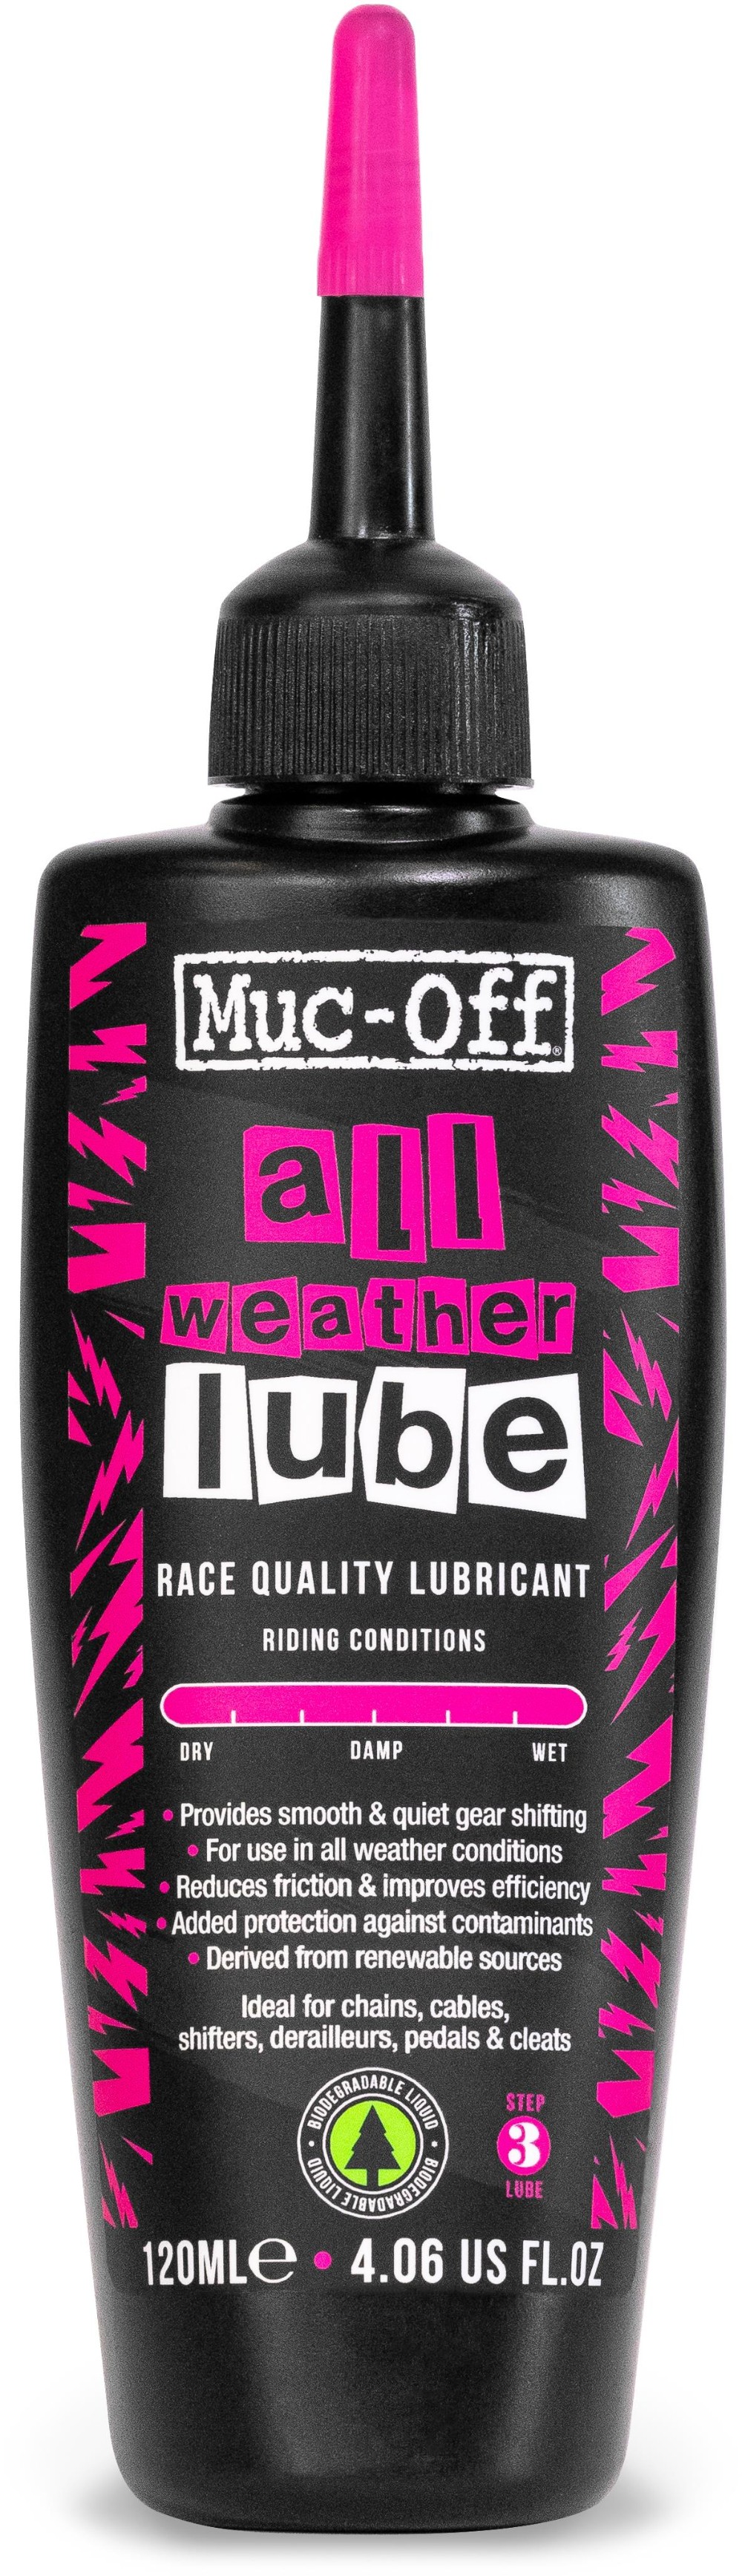 All Weather Lube 120ml image 0